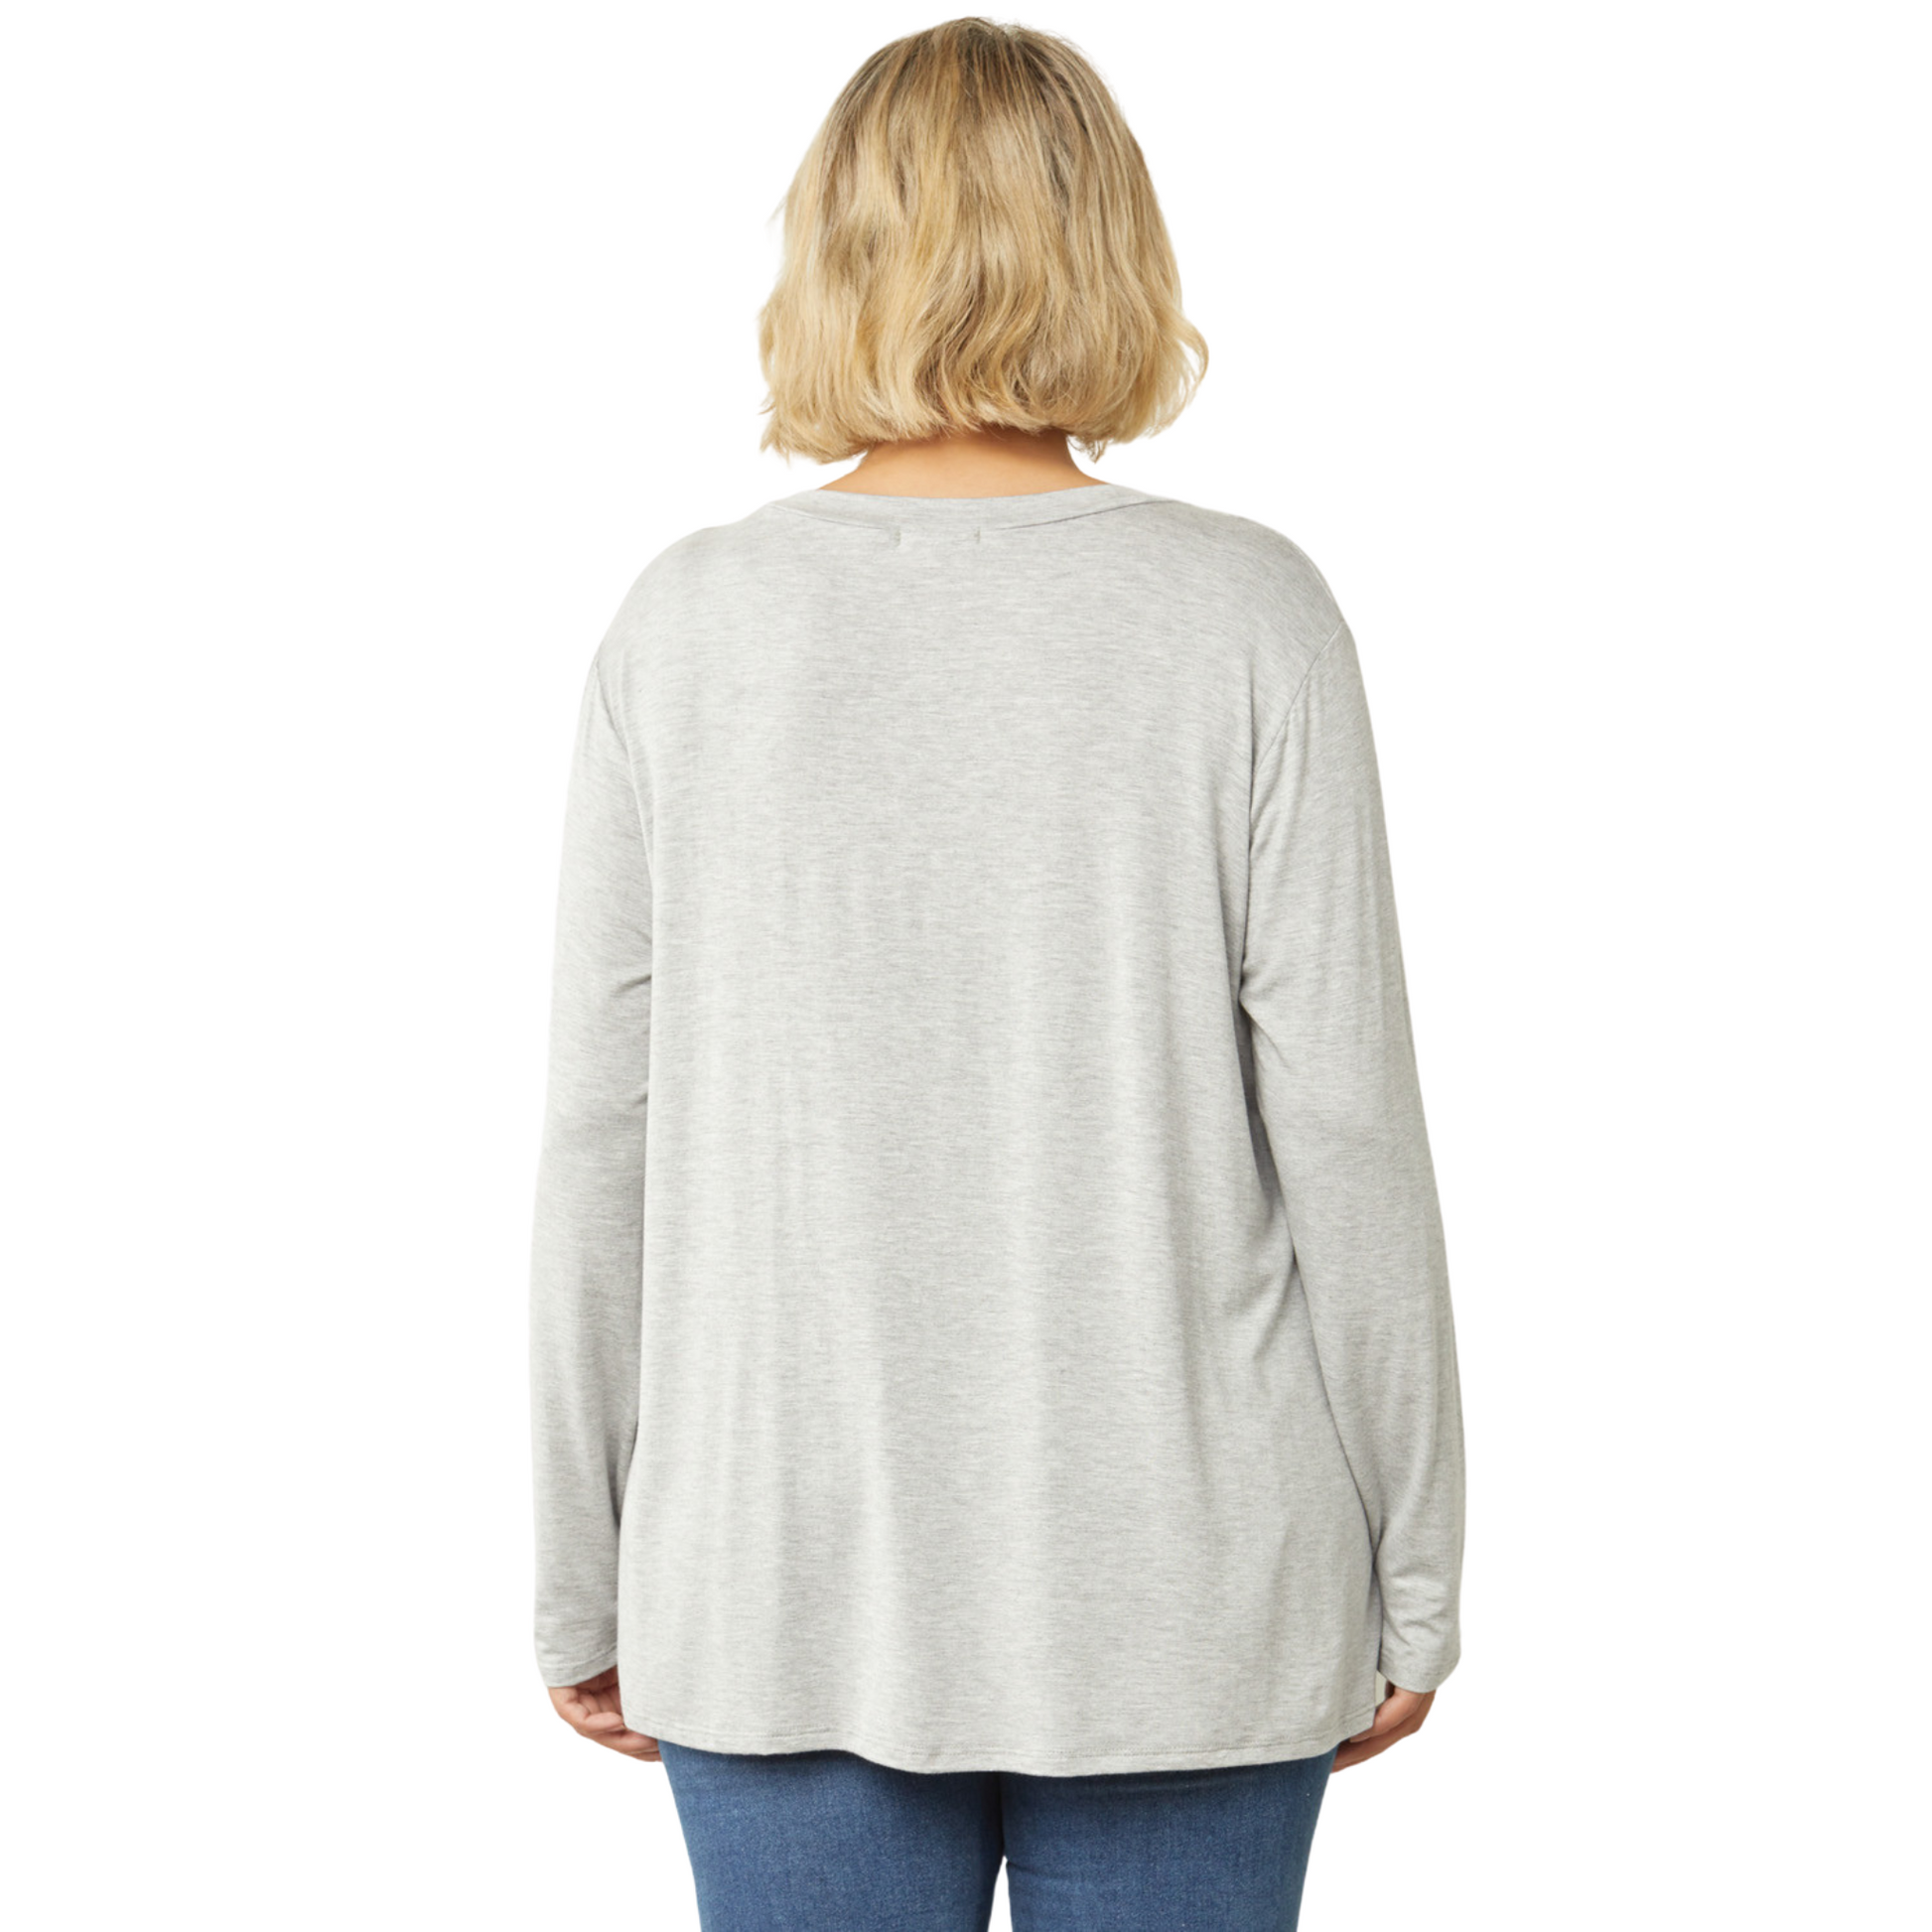 Our Long Sleeve Tiger Tee is a timeless classic in modern plus sizes. Crafted from a soft and stretchy cotton blend, this light grey shirt features a cute tiger graphic for maximum impact. Look and feel your best with our comfortable, stylish tee!